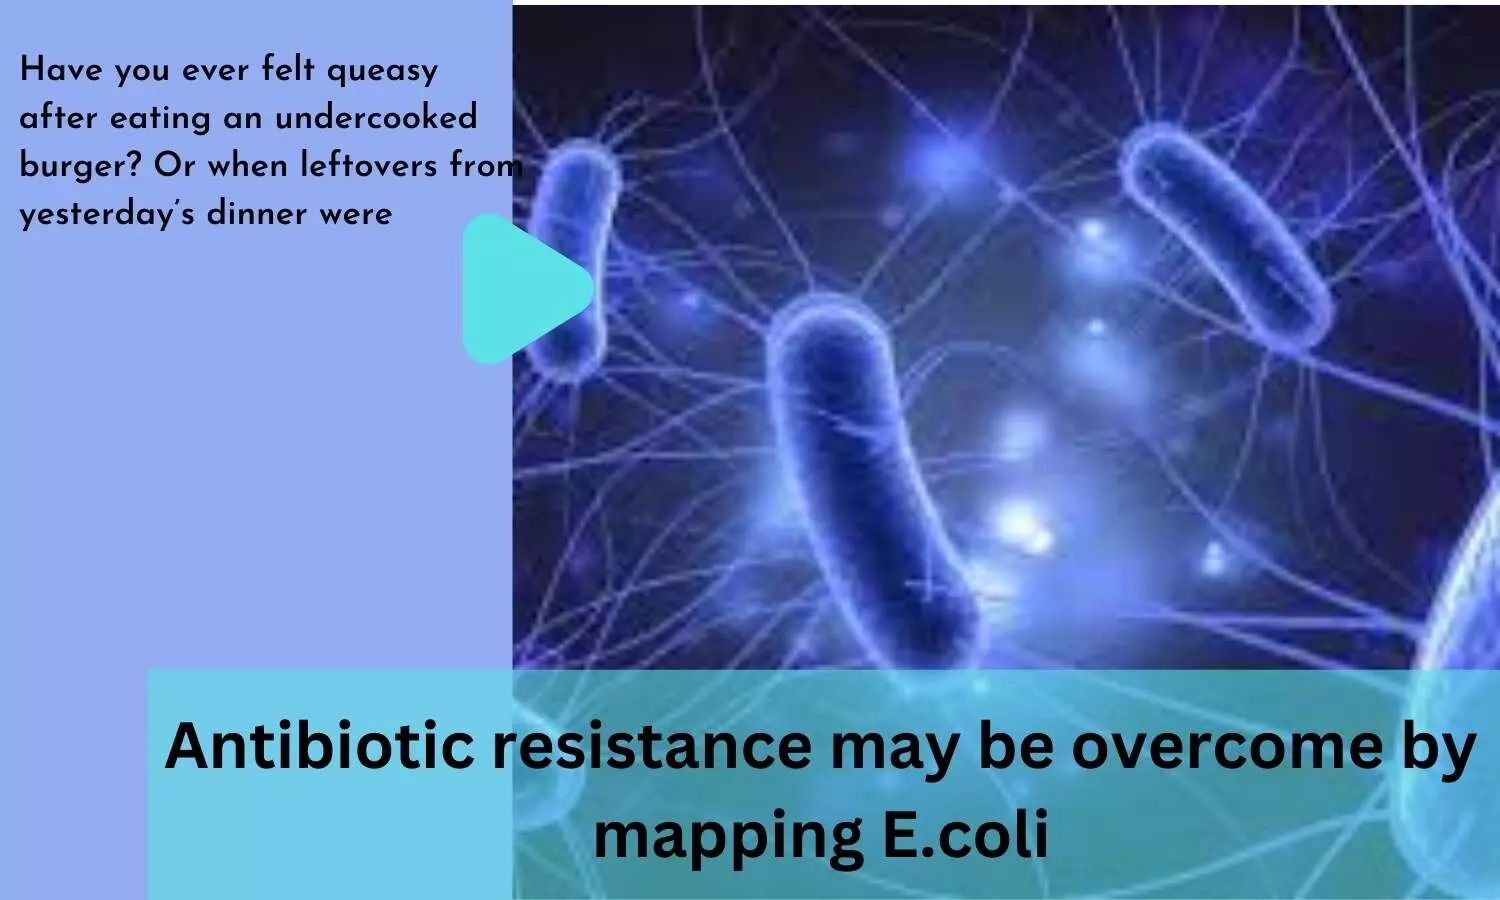 Antibiotic resistance may be overcome by mapping E.coli